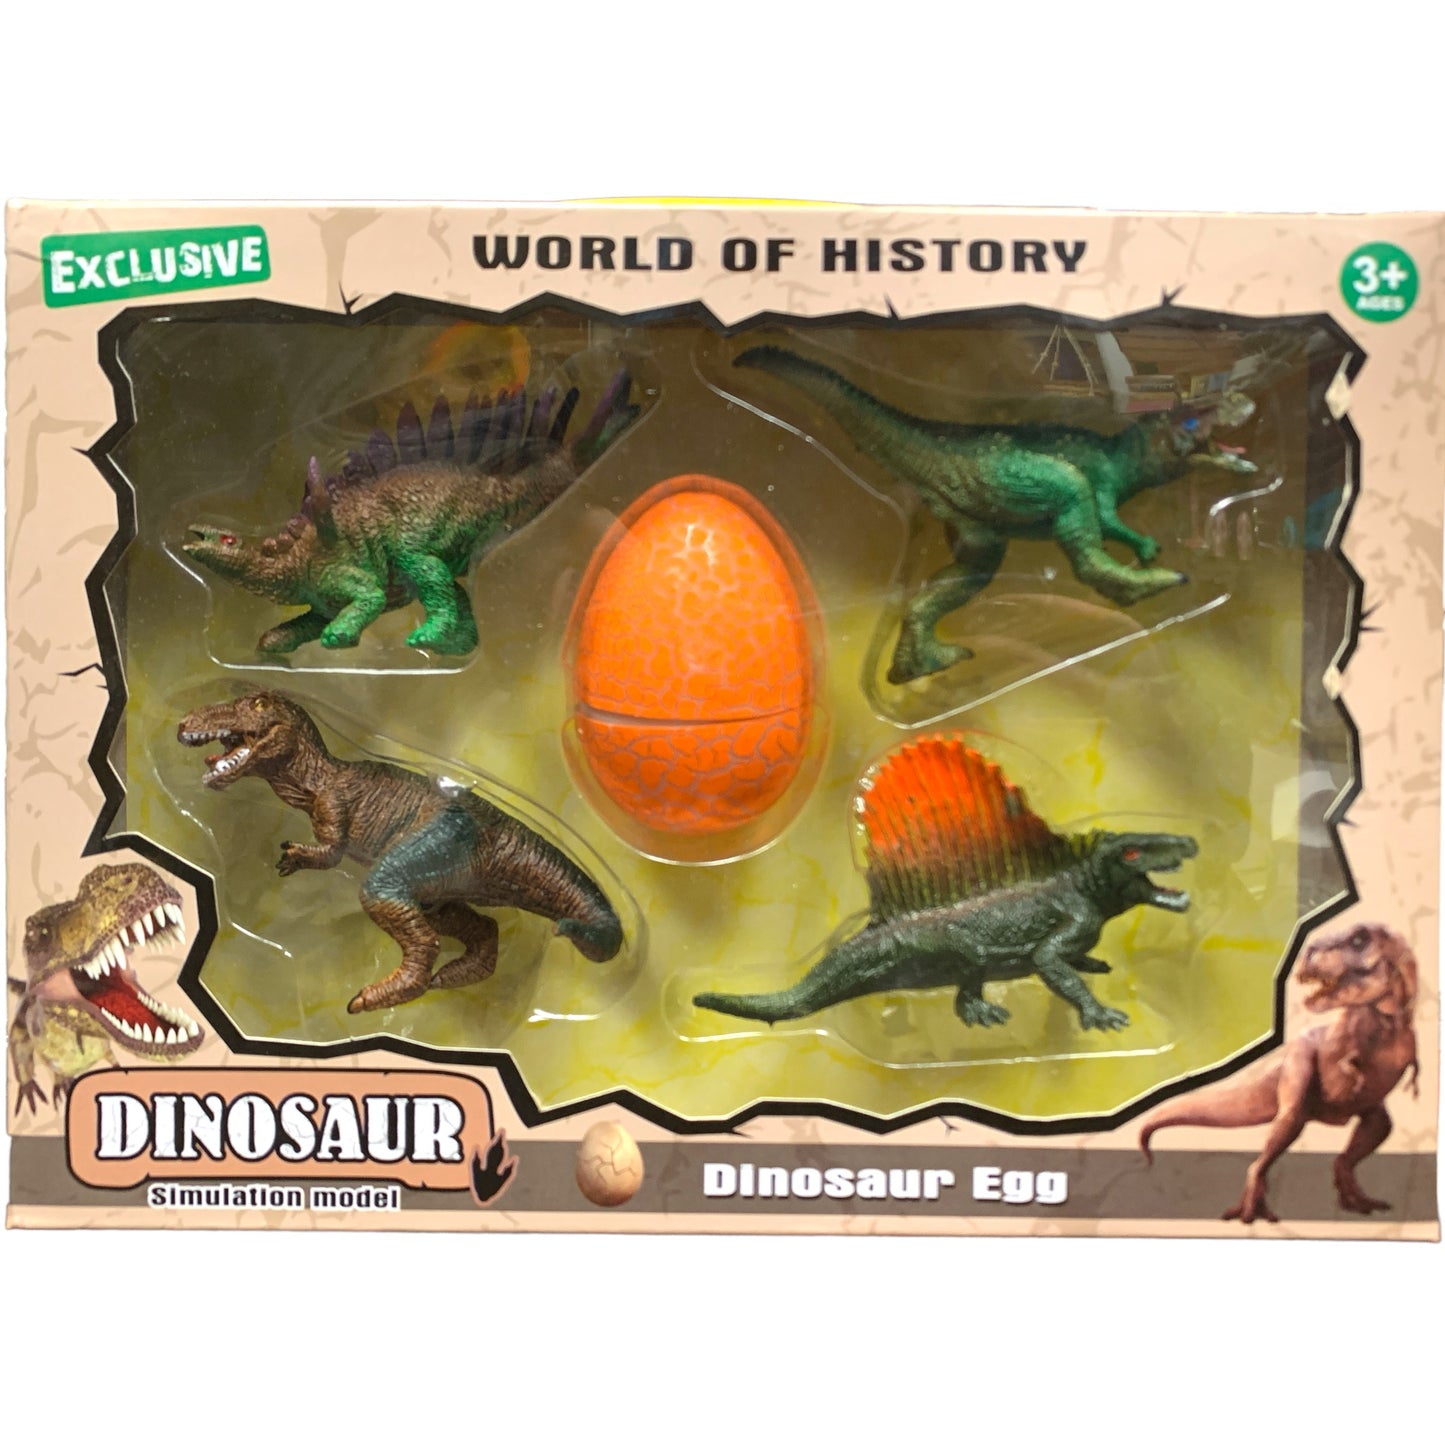 Set OF 6 Dinosaurs - Model Figure Toys ABS Plastic - Boxed 46x6x26cm - NEW920